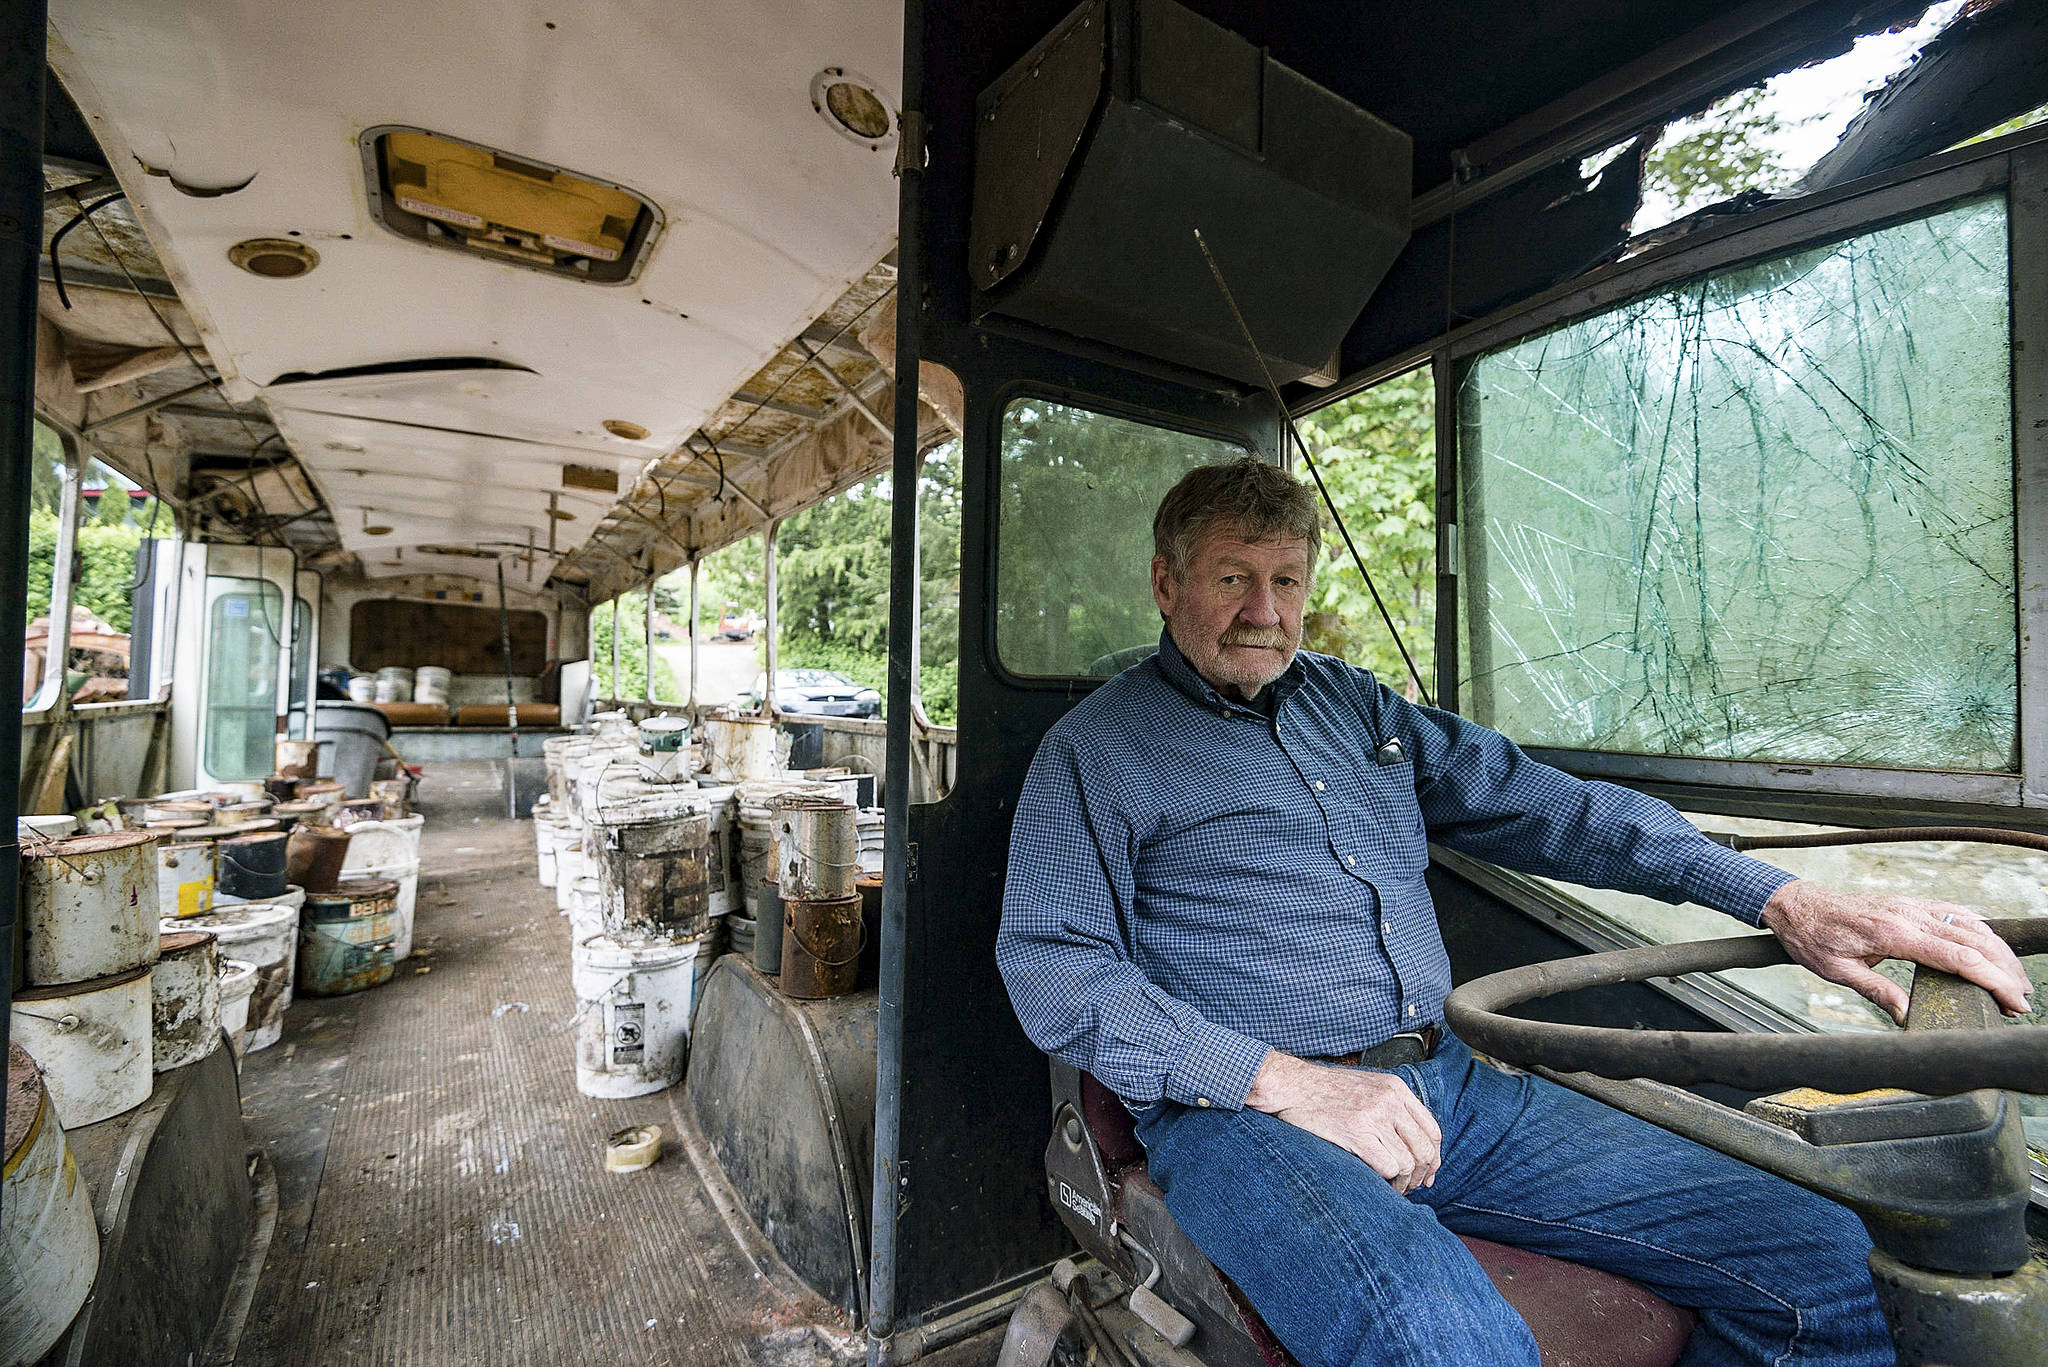 Charles Pillon sits inside one of the several buses on Iron Mountain. Photo by Caean Couto